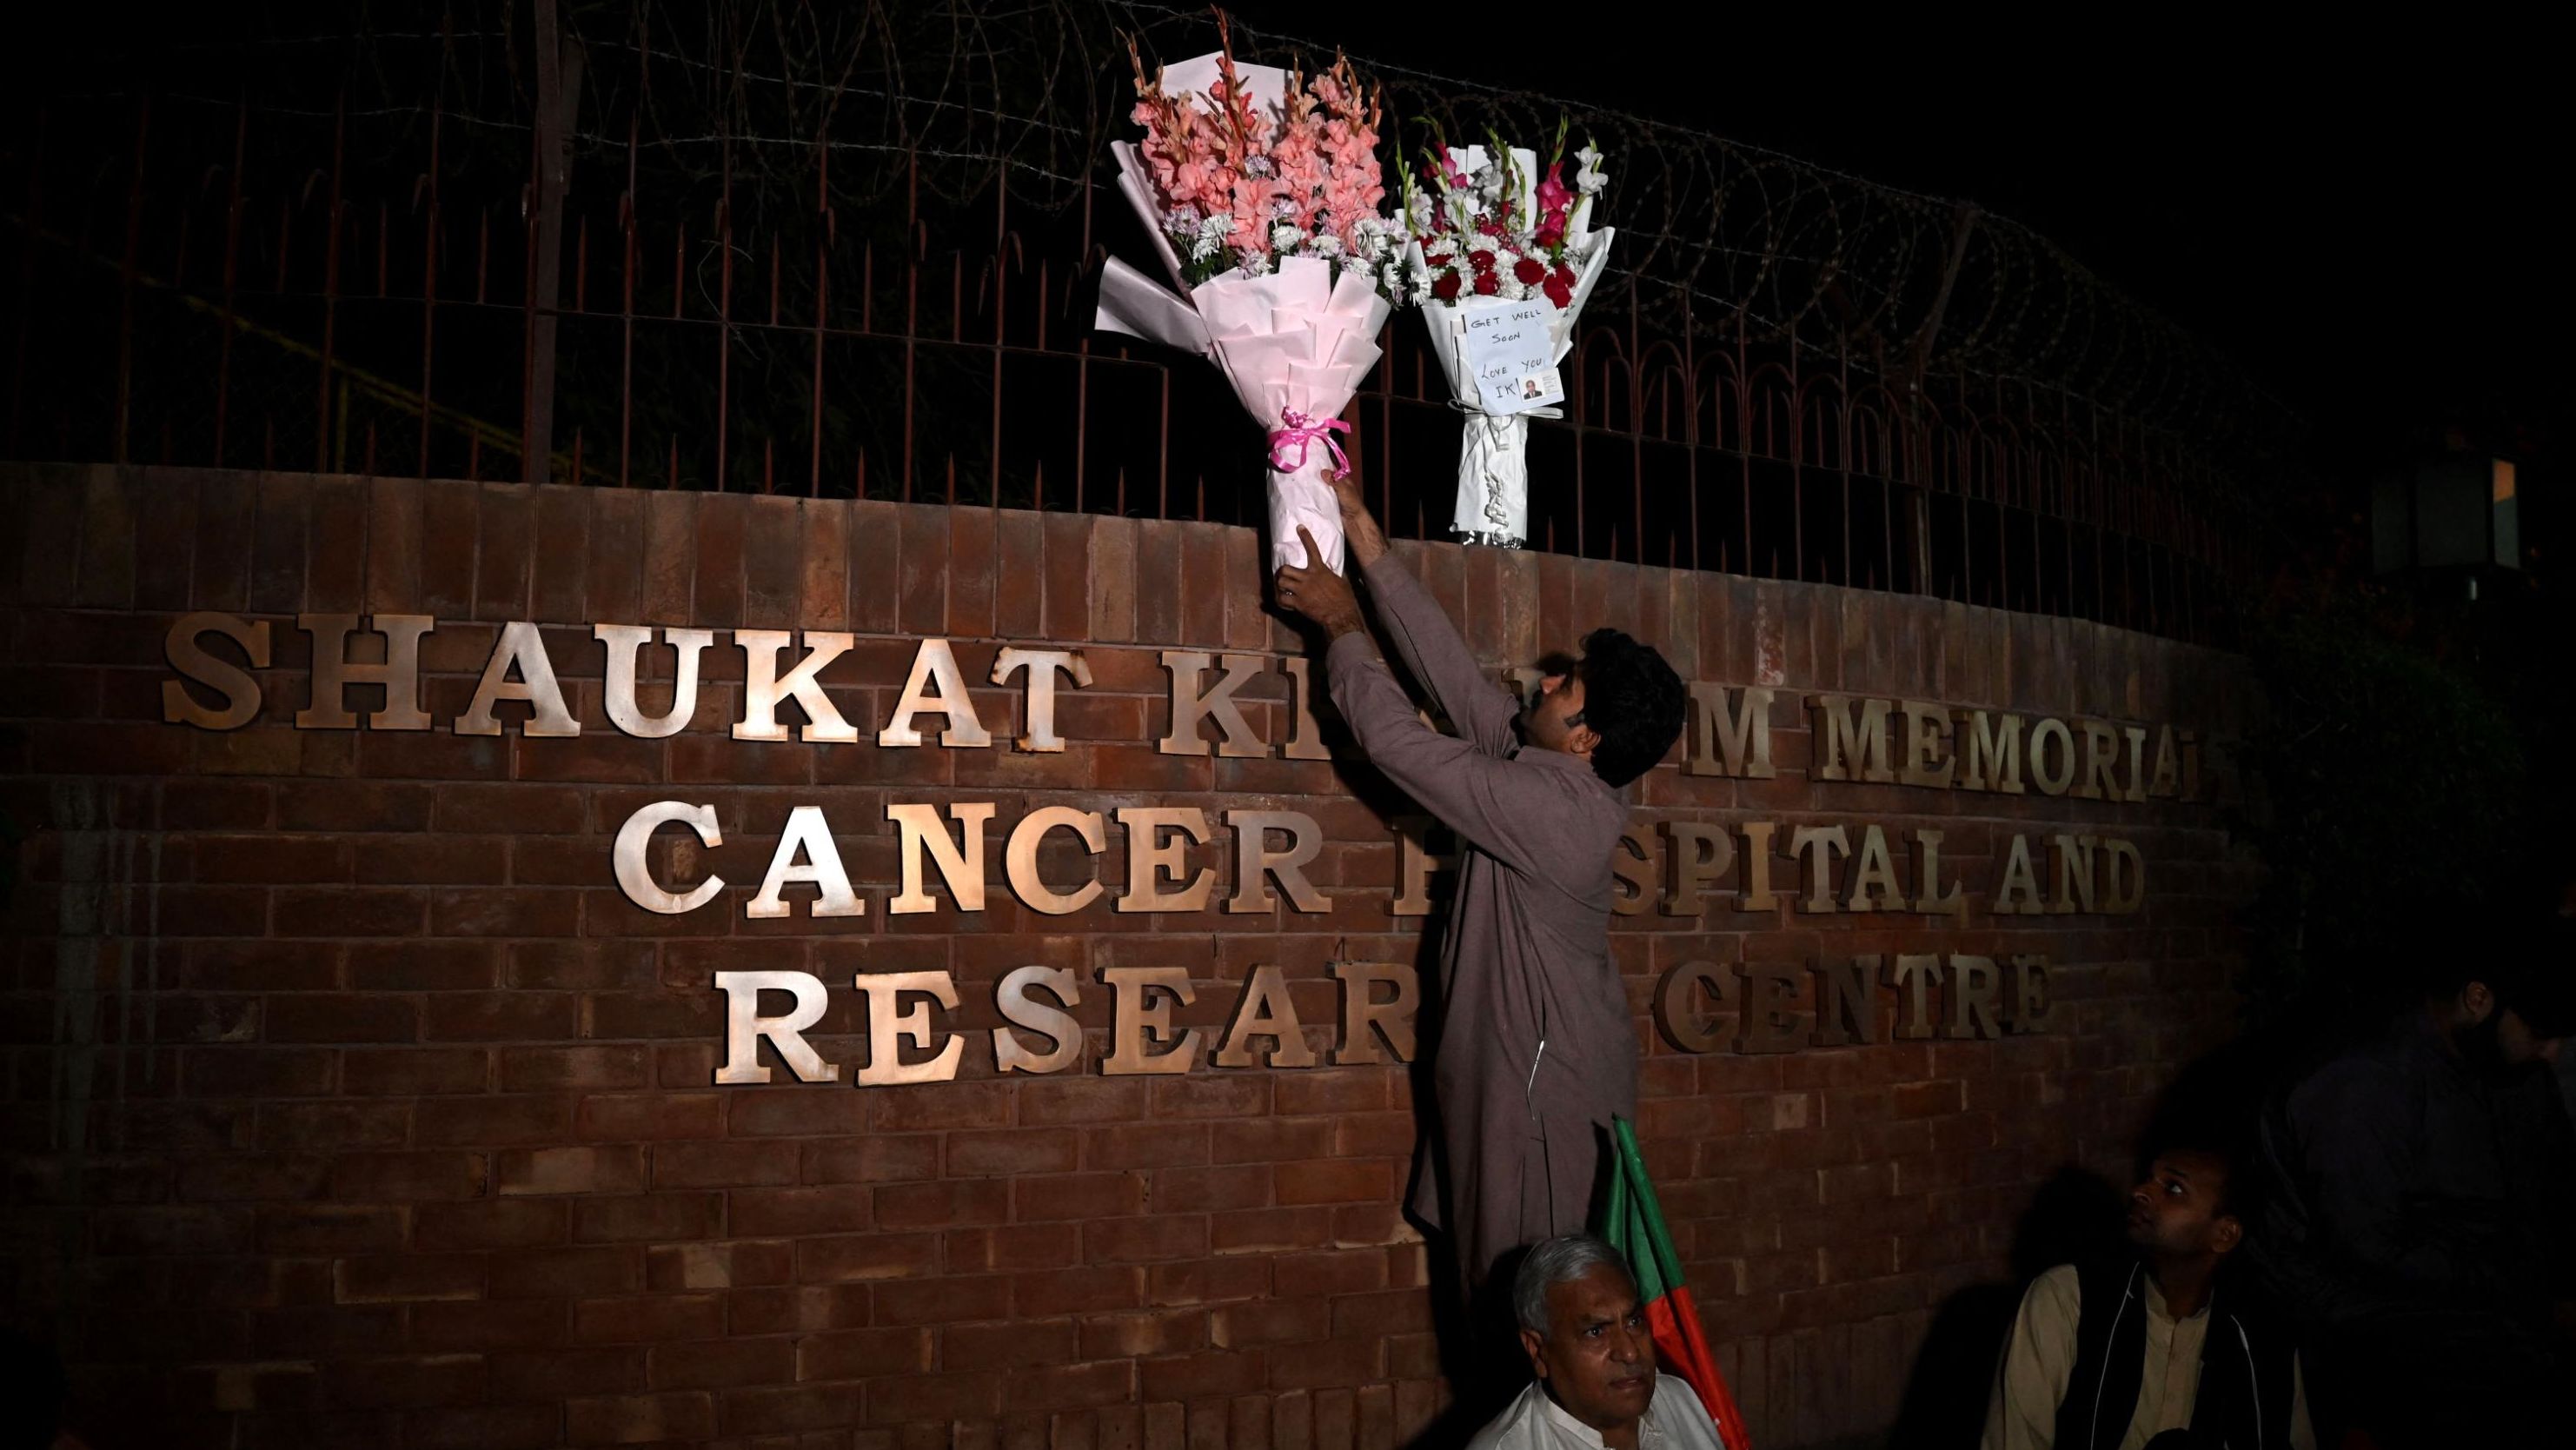 A person places flowers outside the hospital where Pakistan's former Prime Minister Imran Khan is admitted after <a href="https://www.cnn.com/2022/11/03/asia/imran-khan-pakistan-rally-intl" target="_blank">being shot in the leg</a> at a rally in Lahore, Pakistan, on Thursday, November 3. 